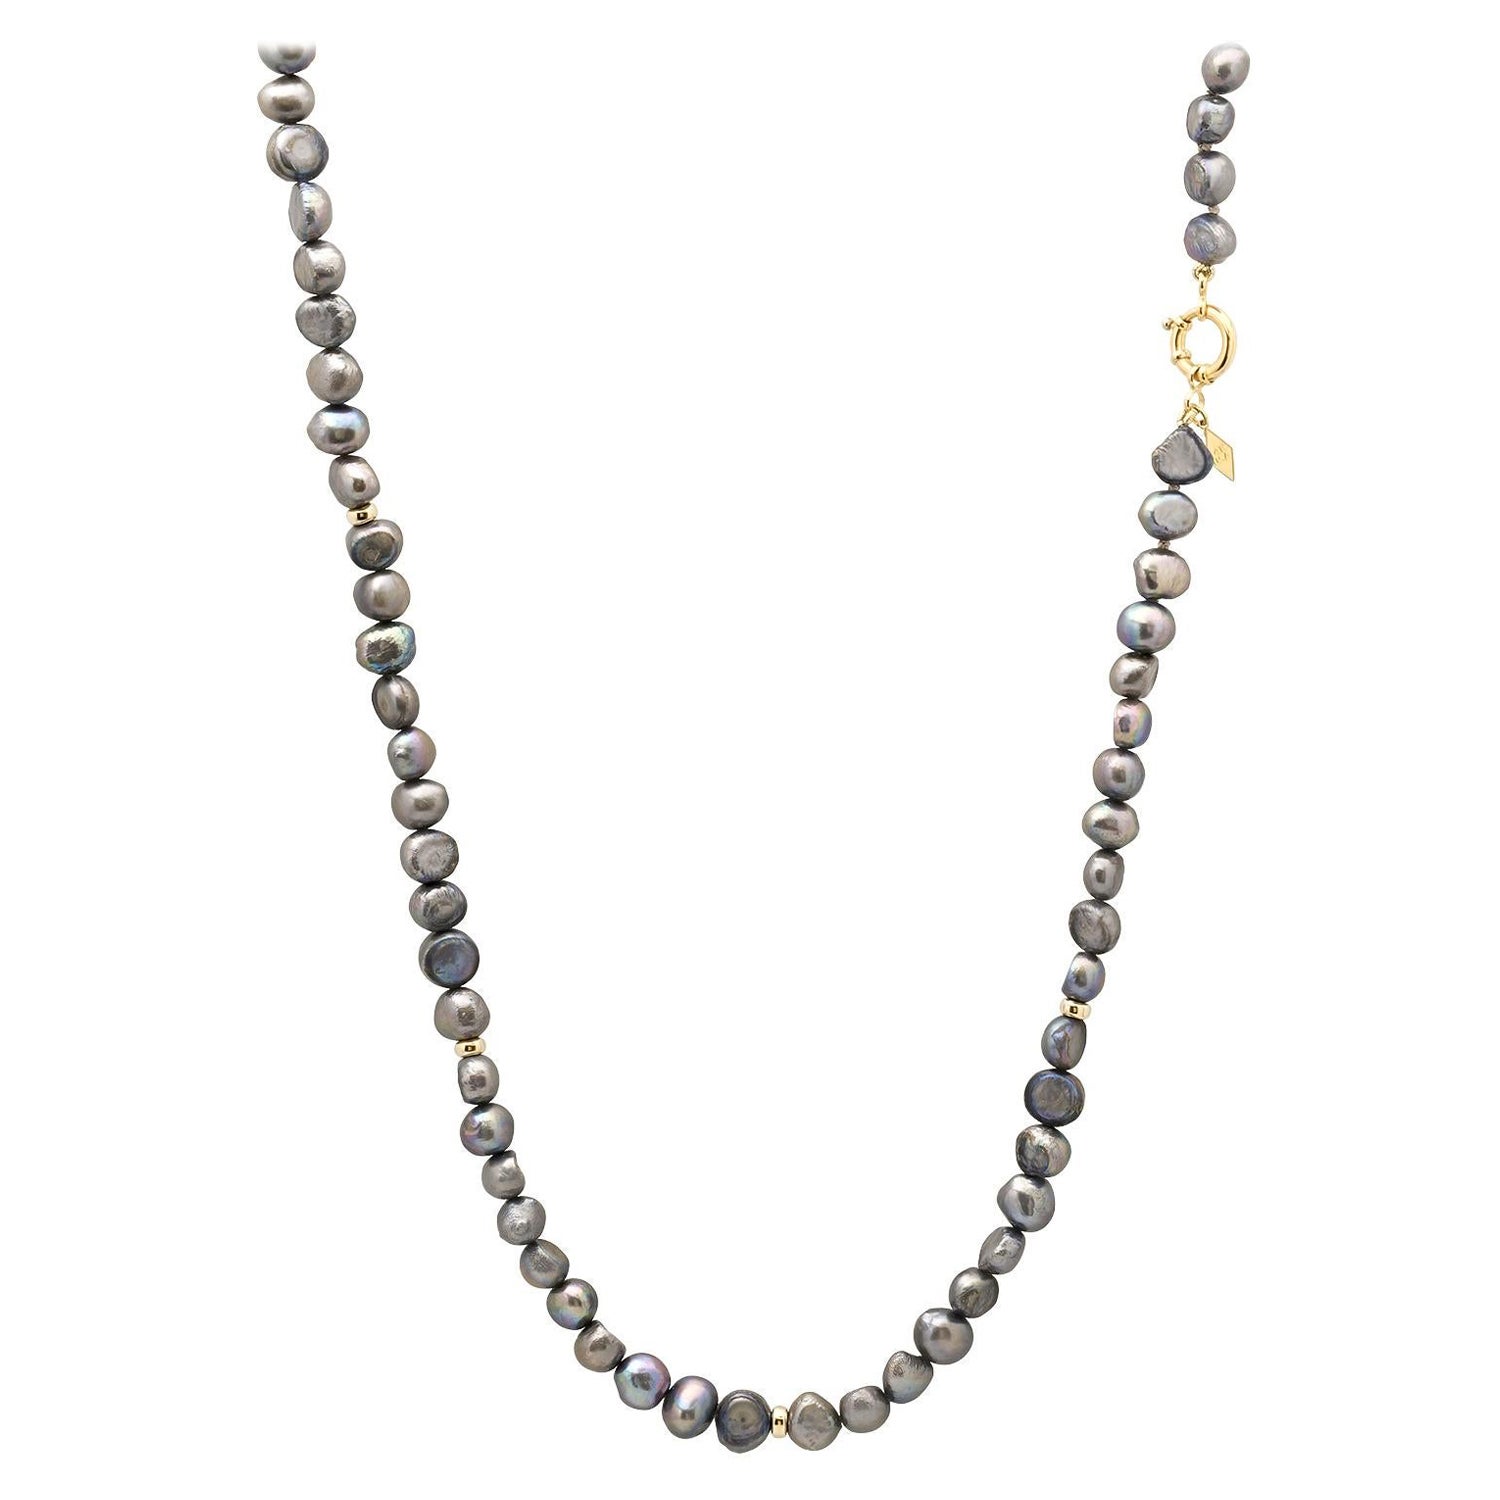 The Long Sailor Lock Beaded Gemstone Necklace: Blue/Grey Keshi Pearls For Sale